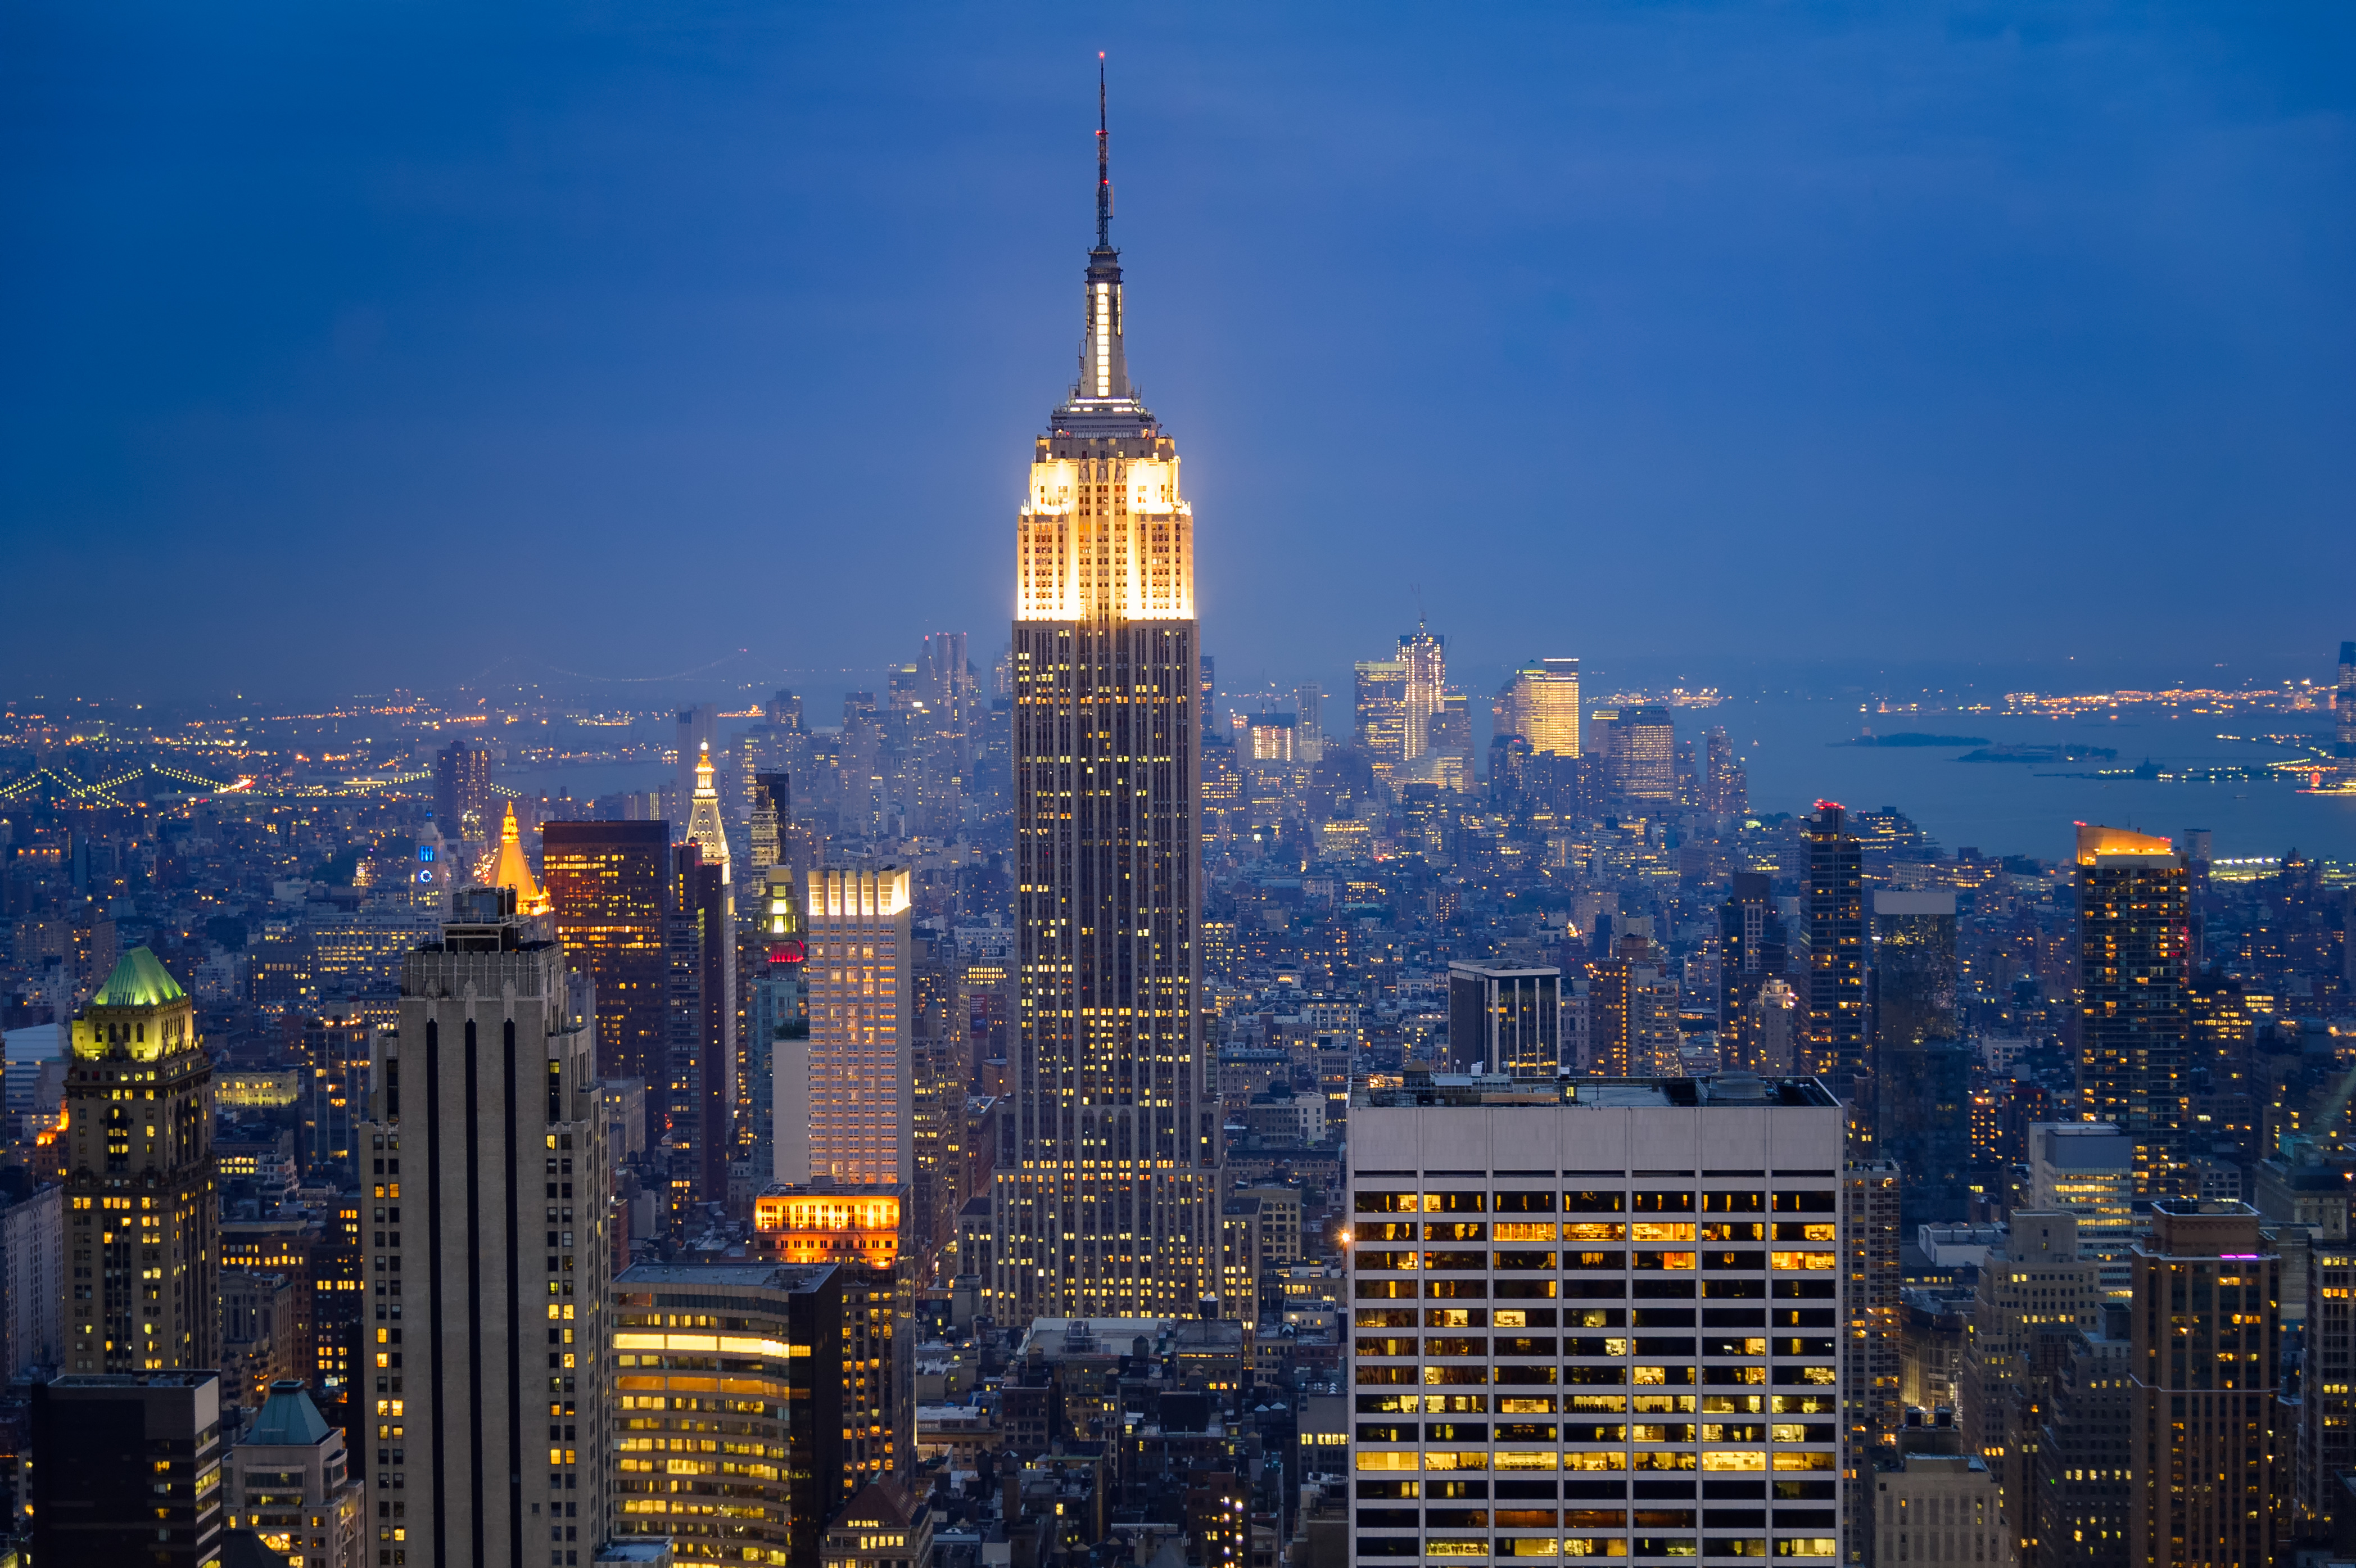 Empire State Building Glow (20301736746)